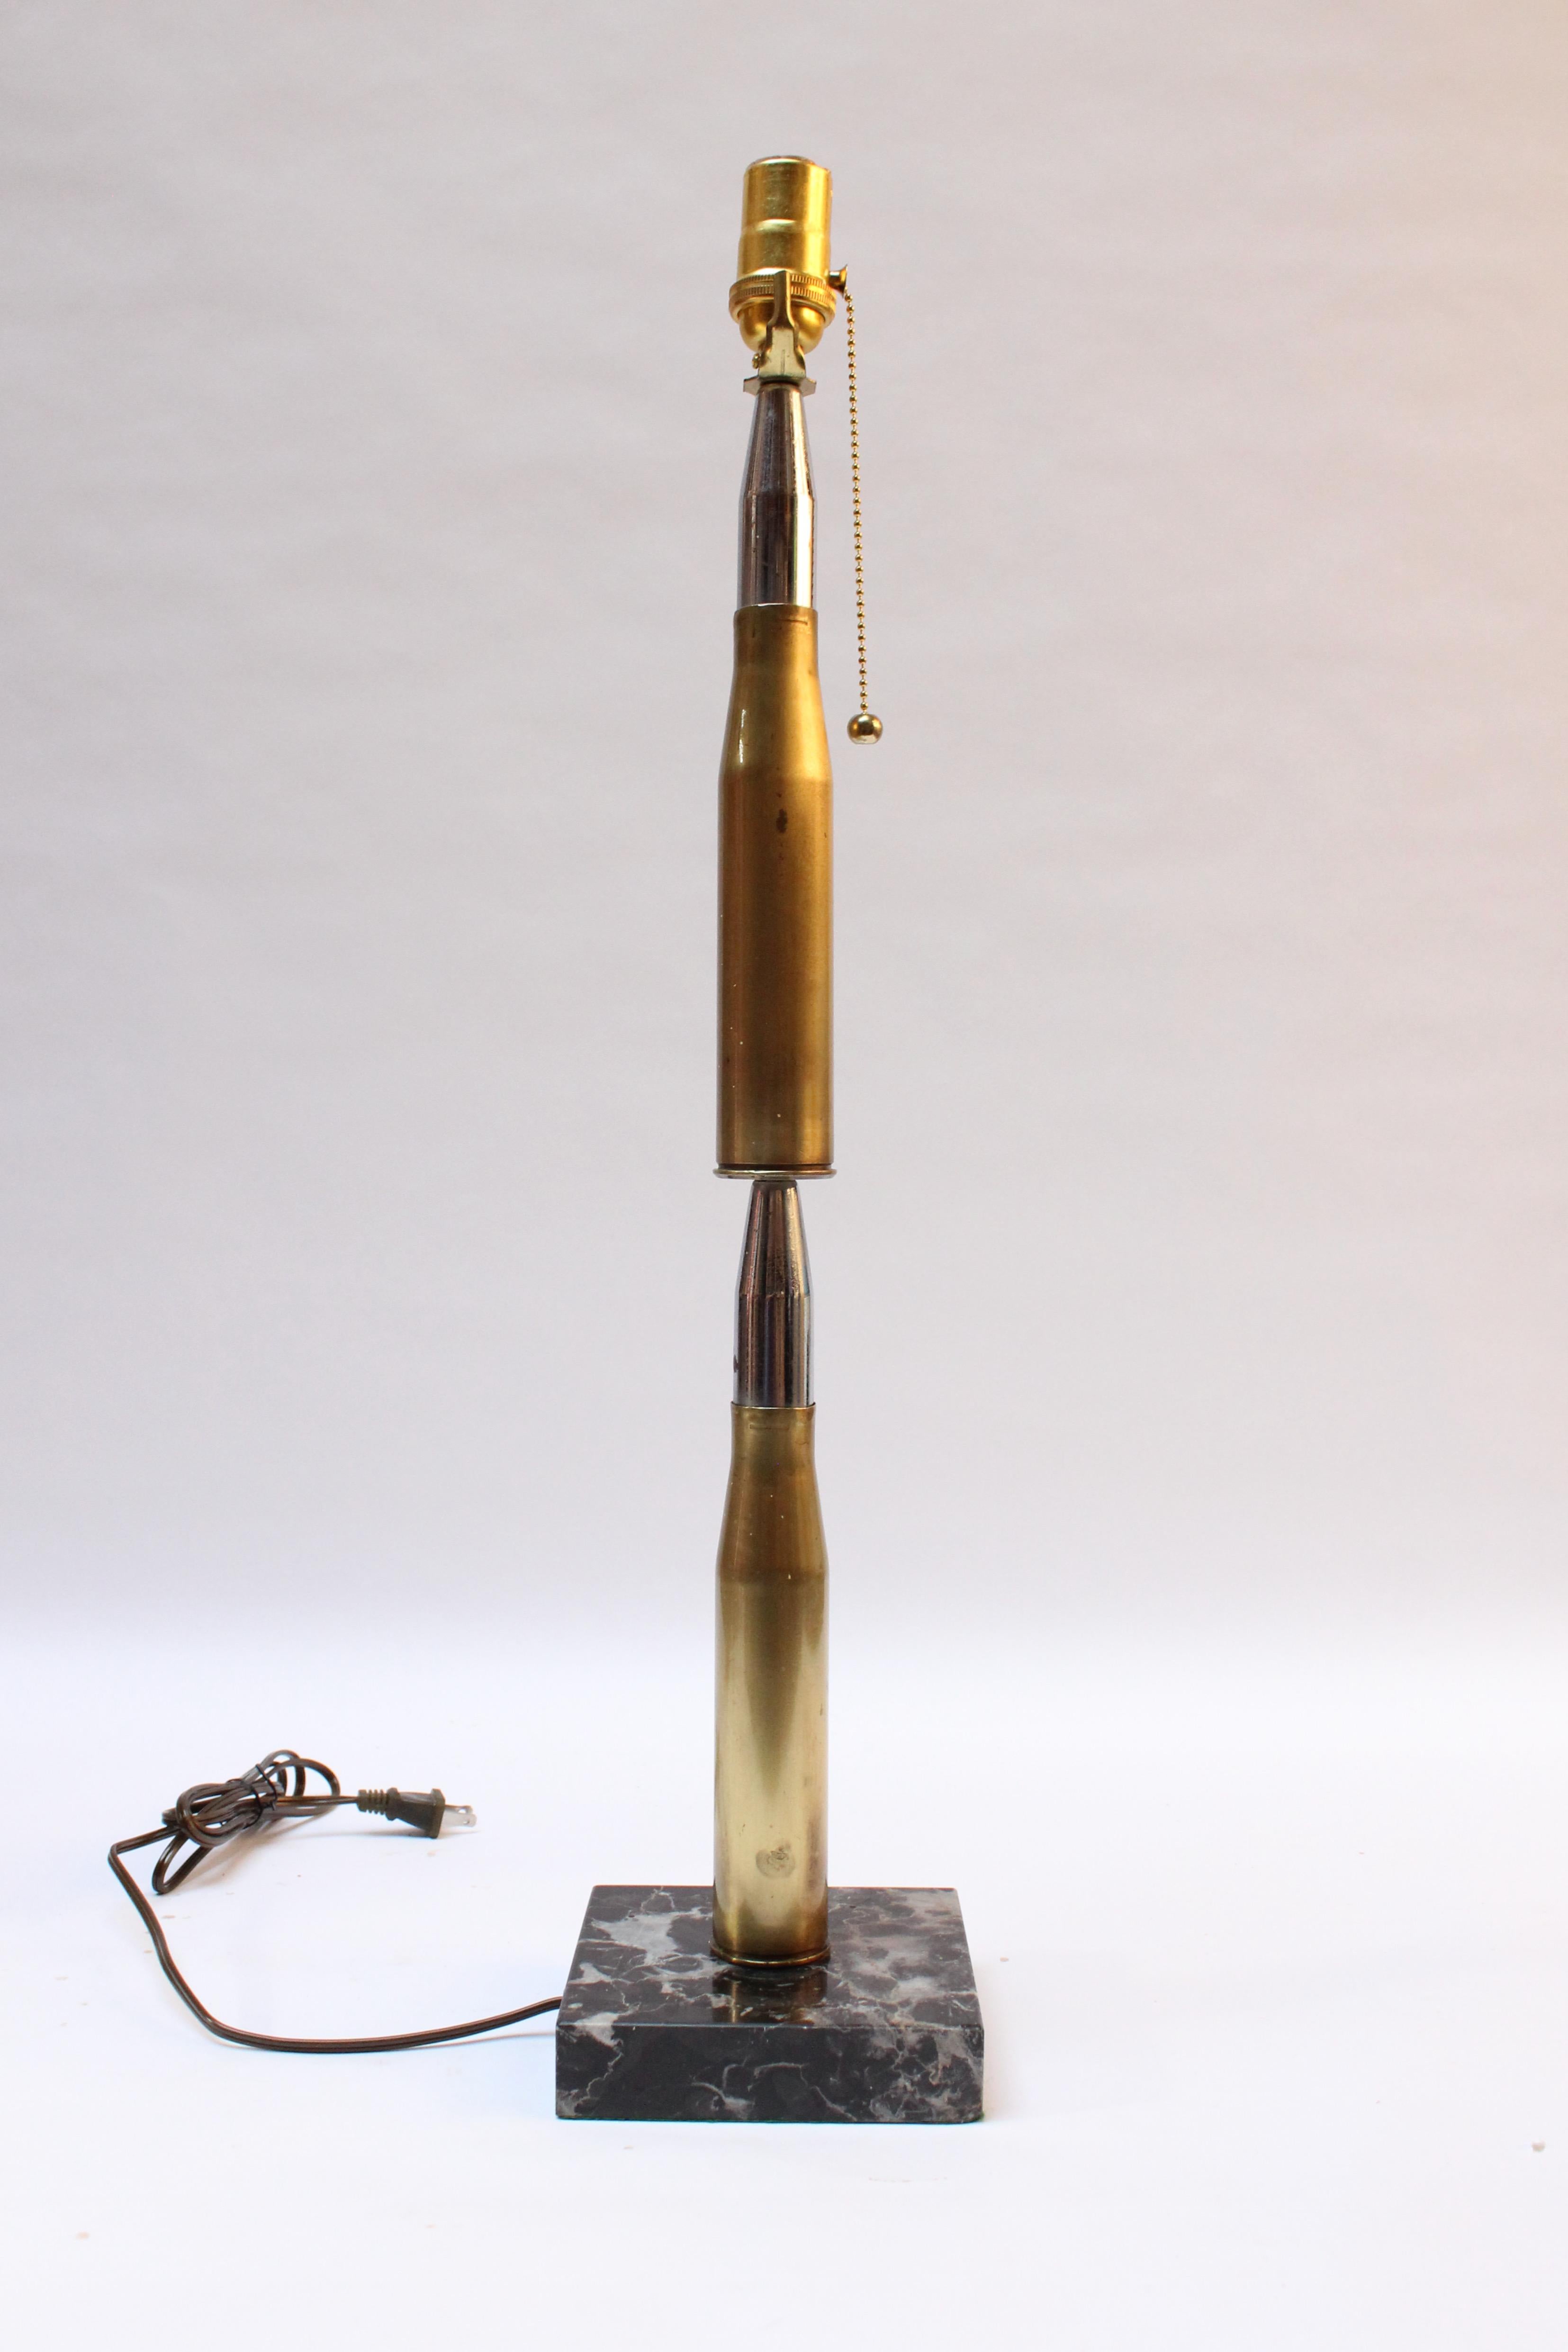 Trench Art lamp fashioned from two stacked brass and chrome high caliber artillery shells mounted to a black marble base (ca. 1918, USA).
Rich patina present, as shown, along with some chrome peeling.
Measures: Height of shell discounting socket: